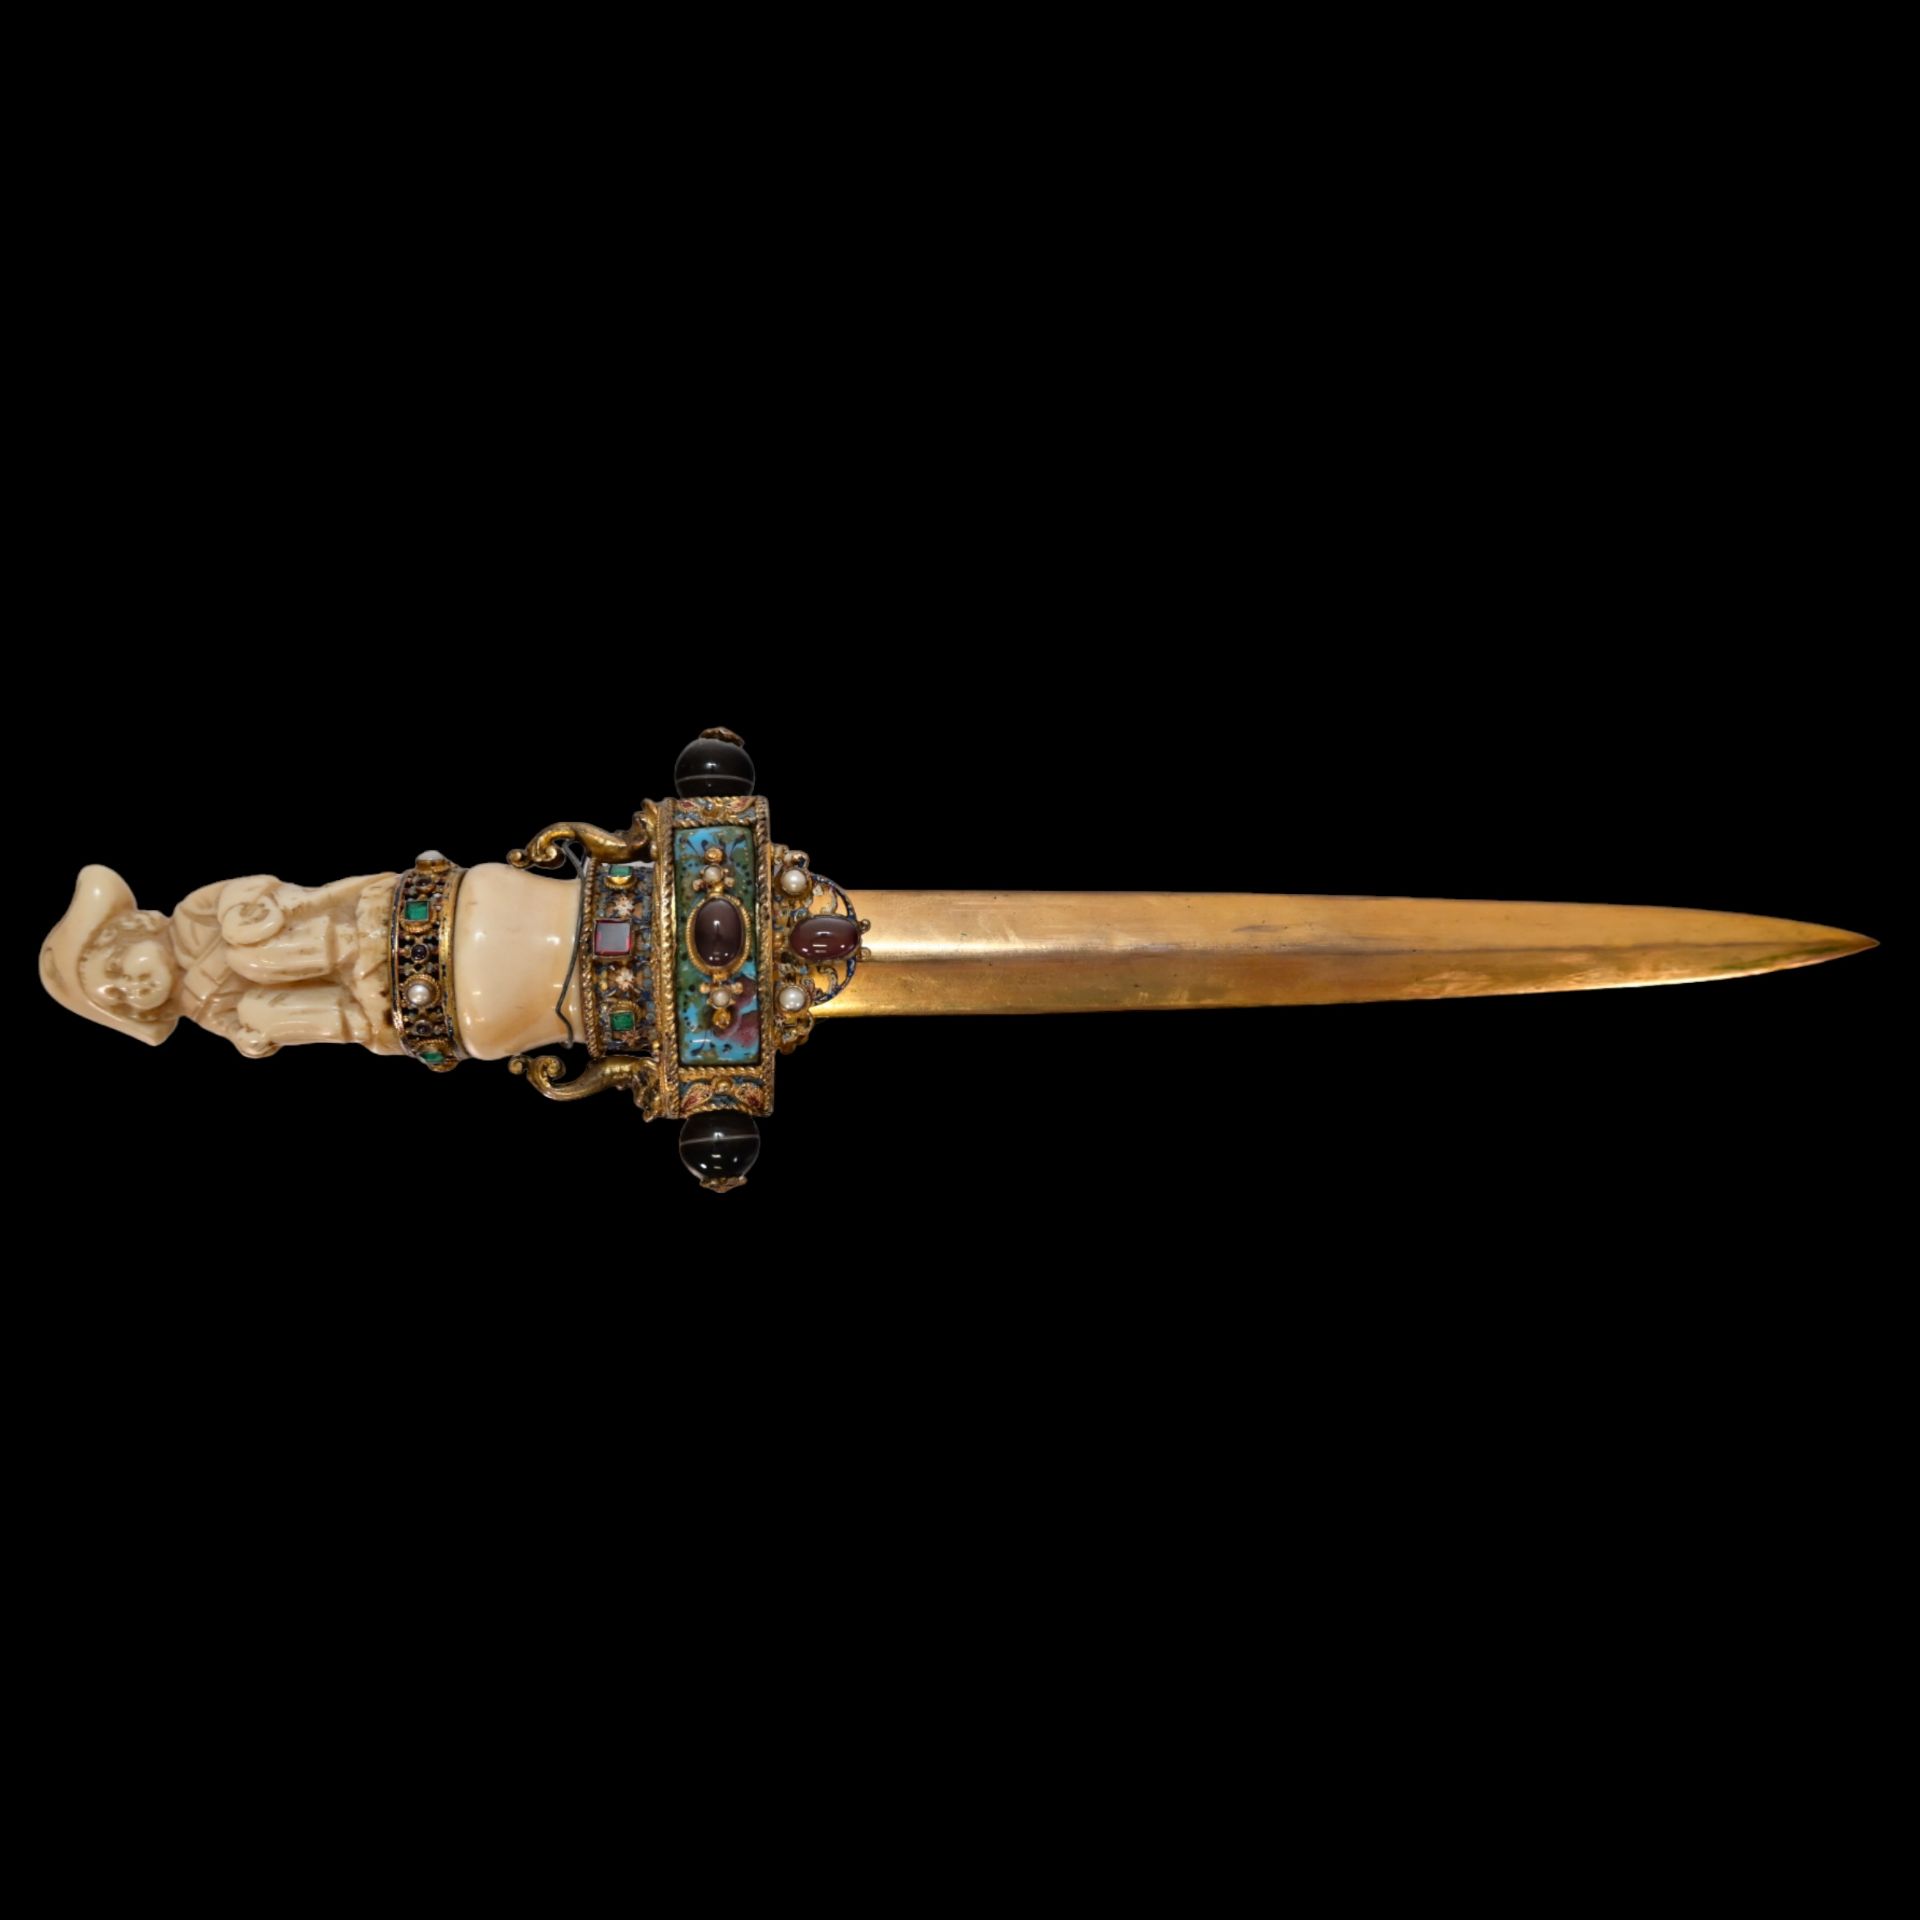 A unique Austrian dagger with a carved bone hilt decorated with gold, precious stones and enamel. - Image 15 of 19